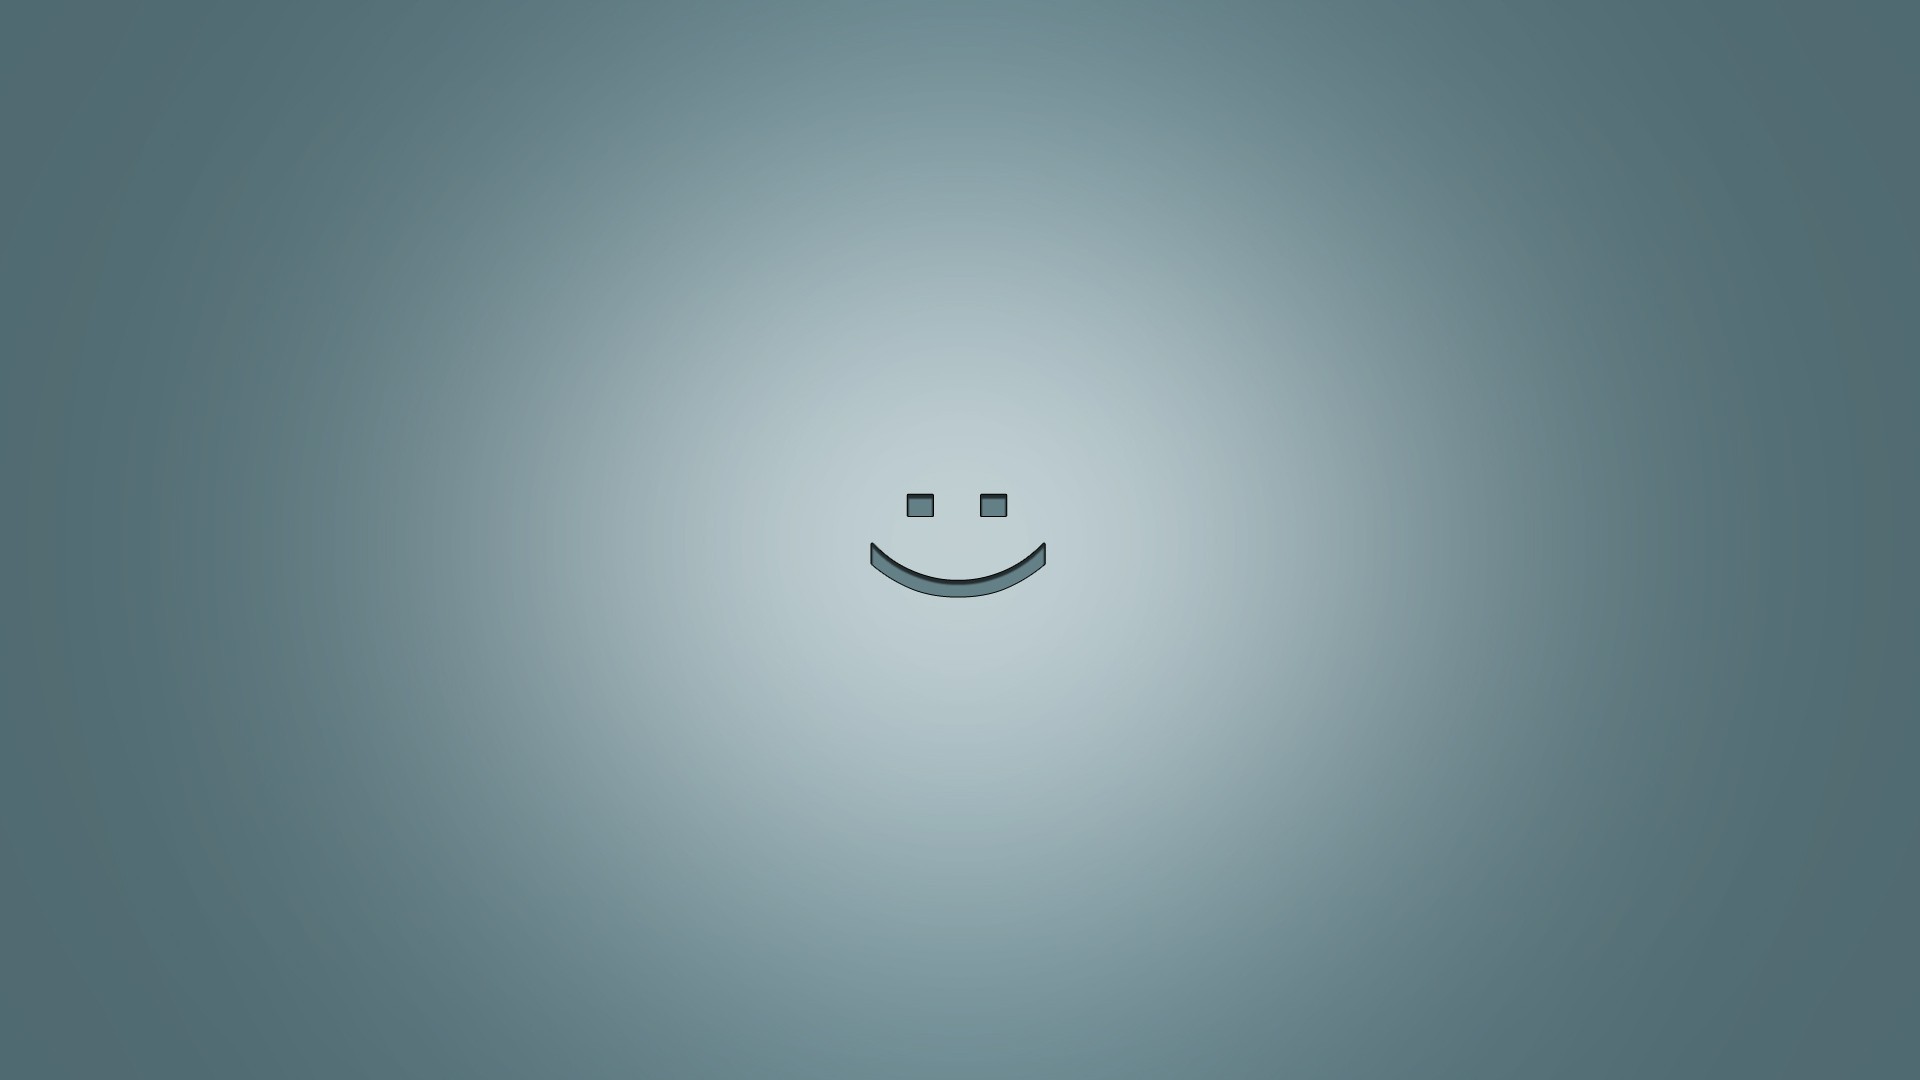 1920x1080  Smiley Face. How to set wallpaper on your desktop? Click the  download link from above and set the wallpaper on the desktop from your OS.